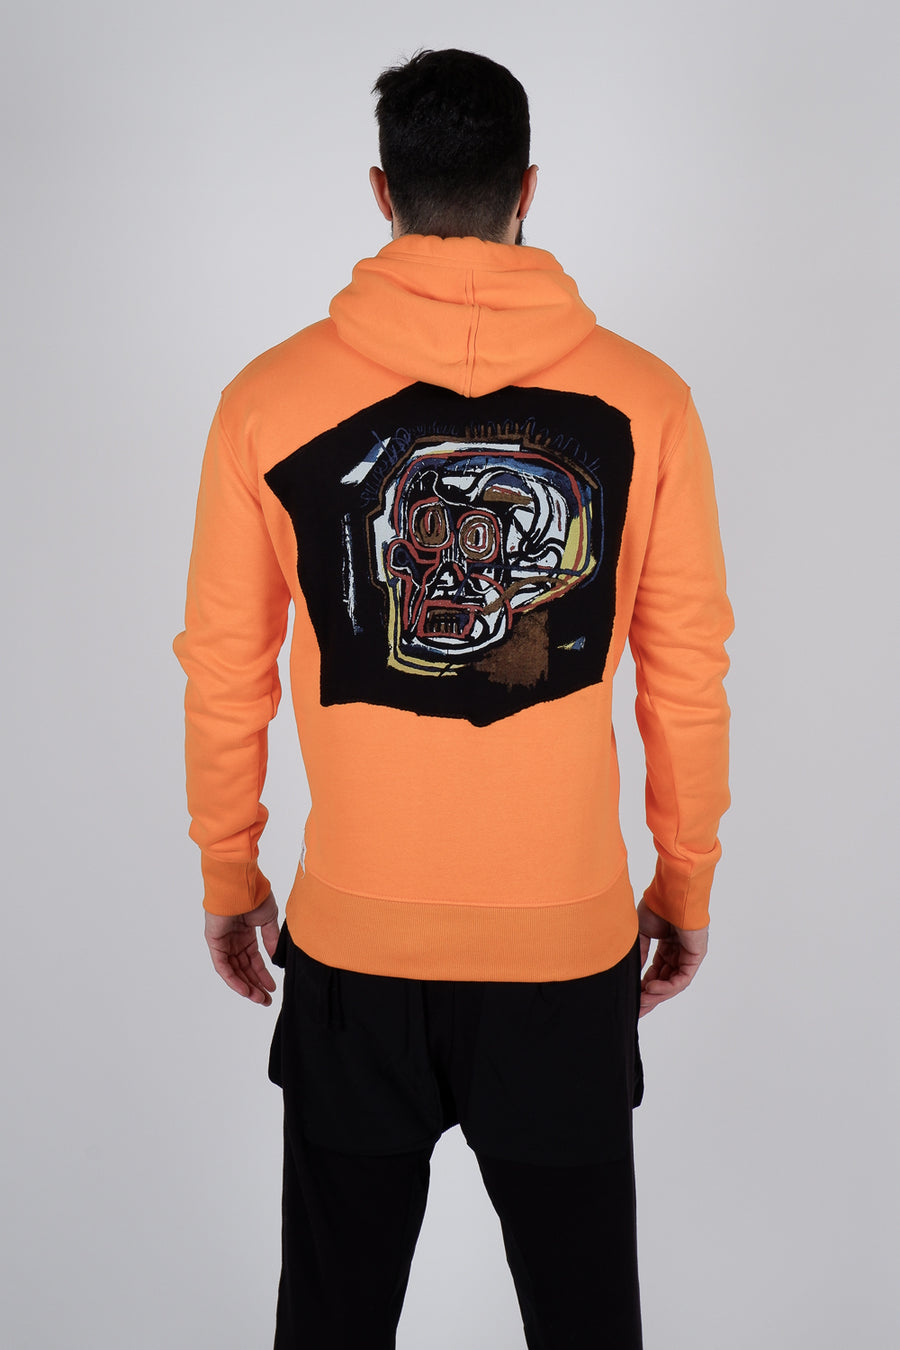 Buy the ABE Basquiat Love Saves Hoodie Orange at Intro. Spend £50 for free UK delivery. Official stockists. We ship worldwide.